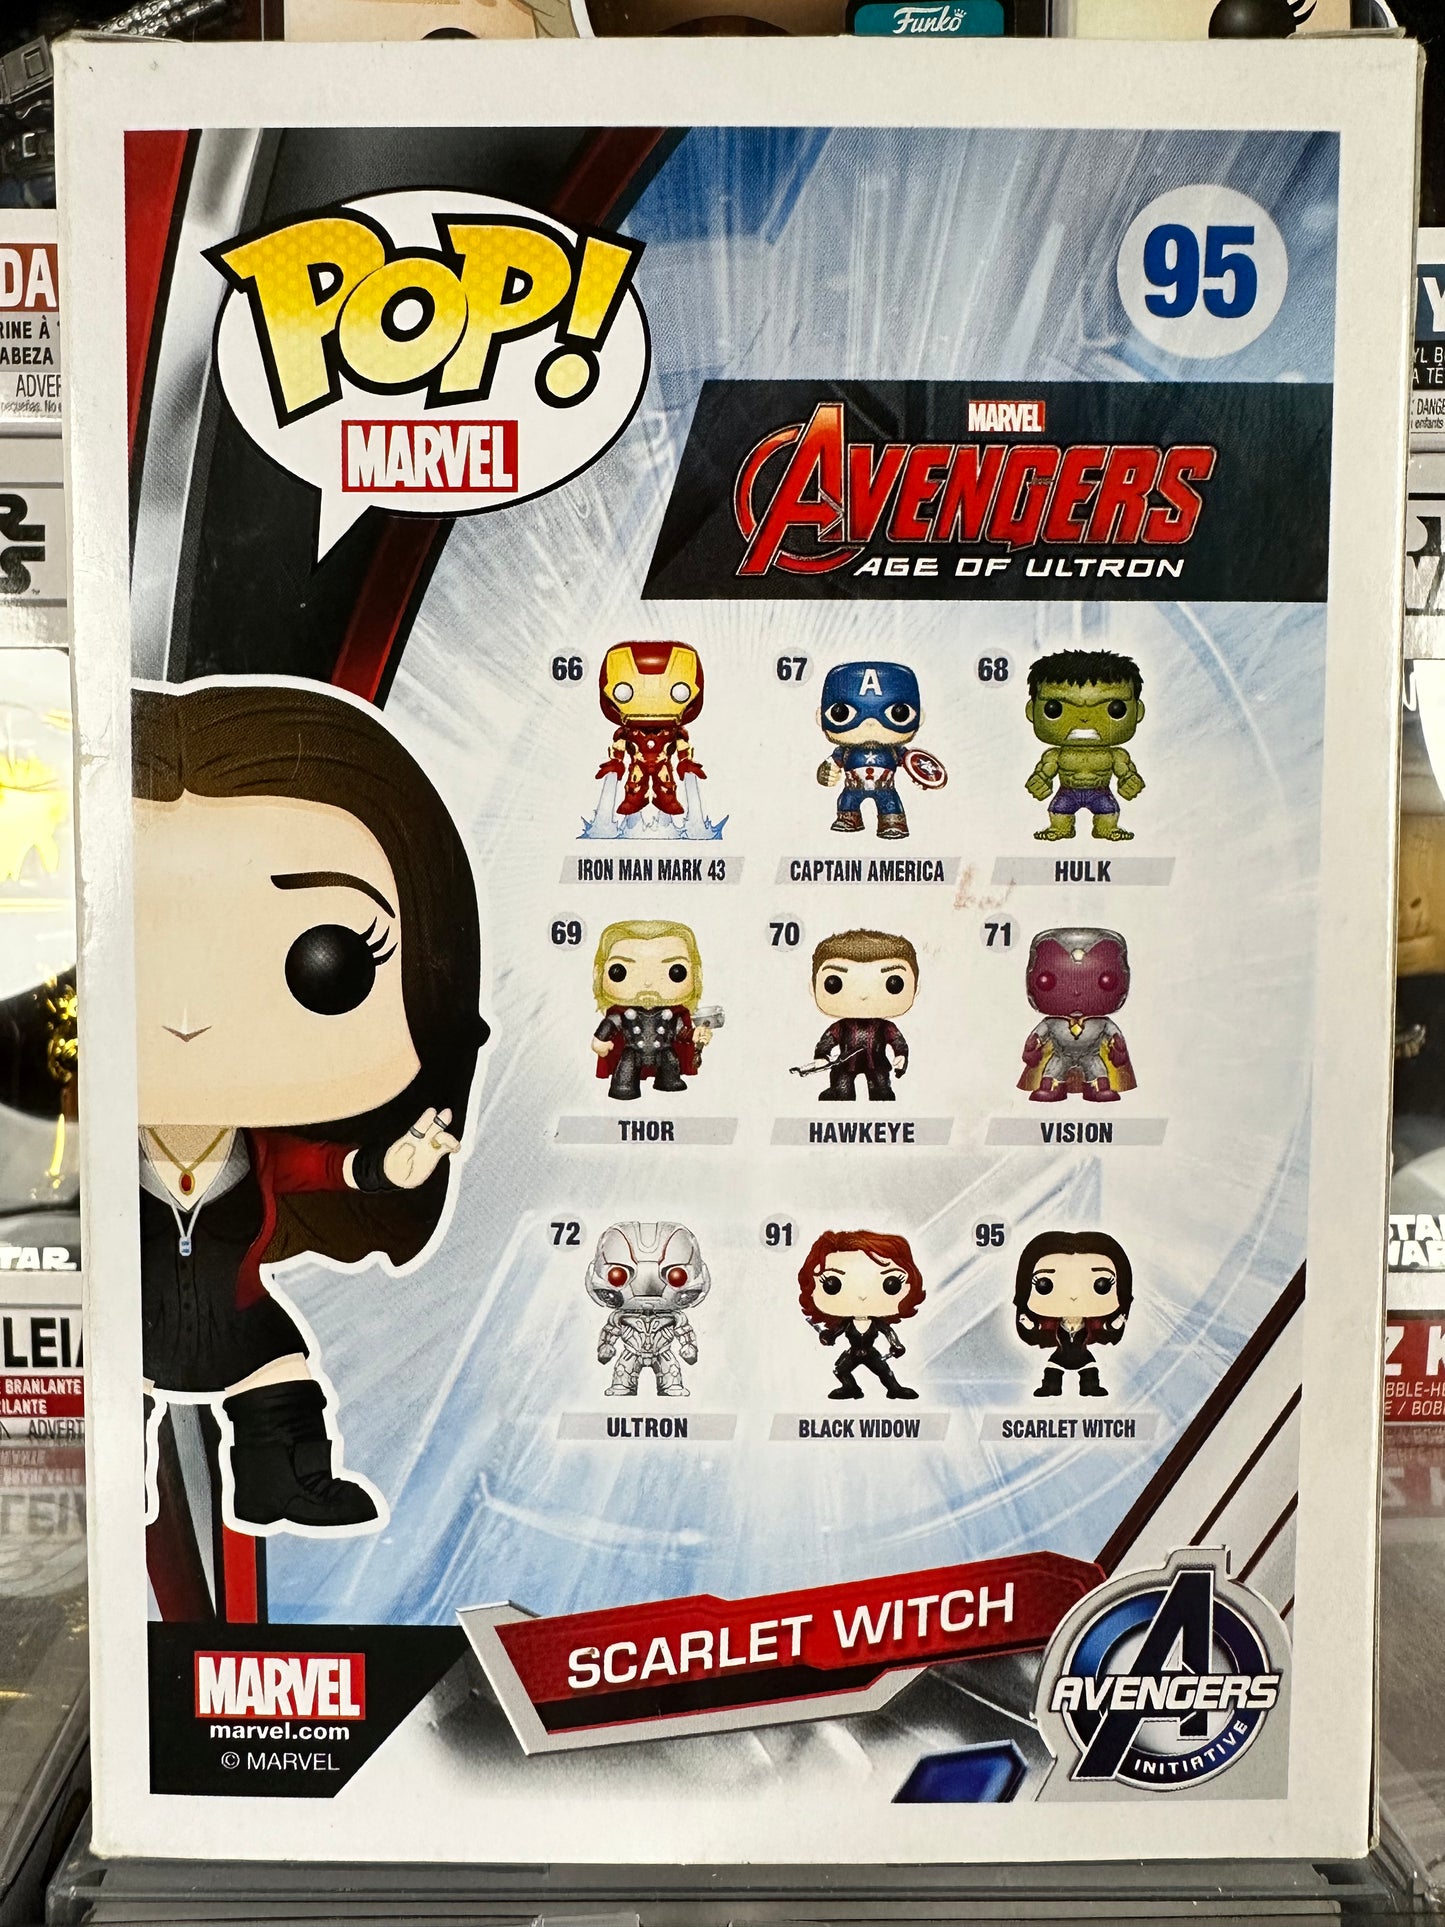 Marvel Avengers Age of Ultron - Scarlet Witch (95) Vaulted